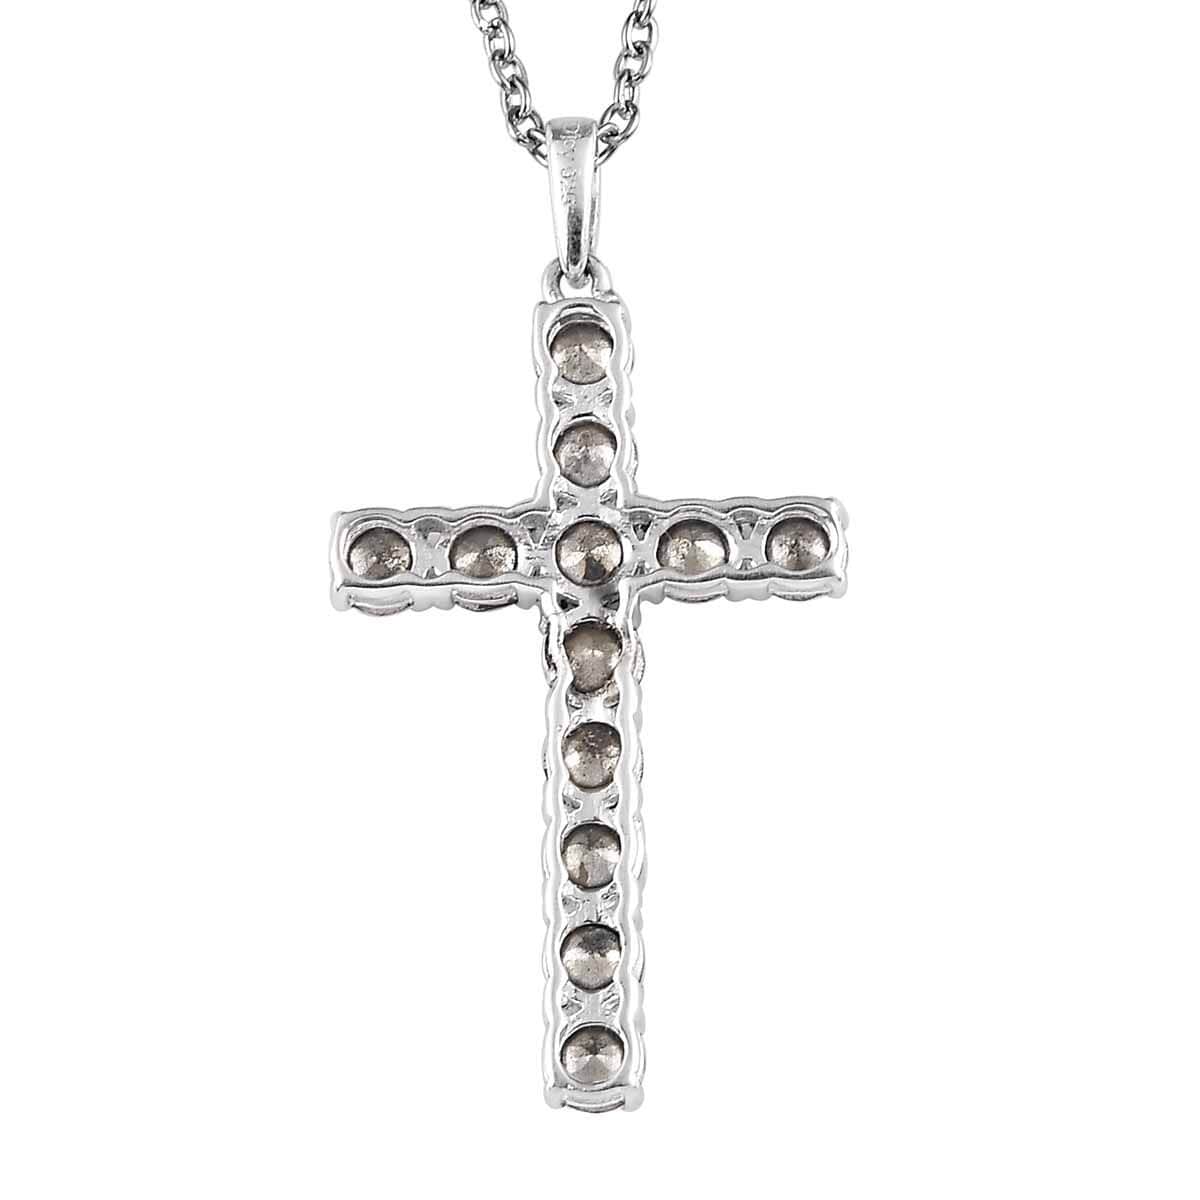 Designer Premium Foilback Amethyst Color Austrian Crystal Cross Pendant in Sterling Silver with Stainless Steel Necklace 20 Inches image number 4